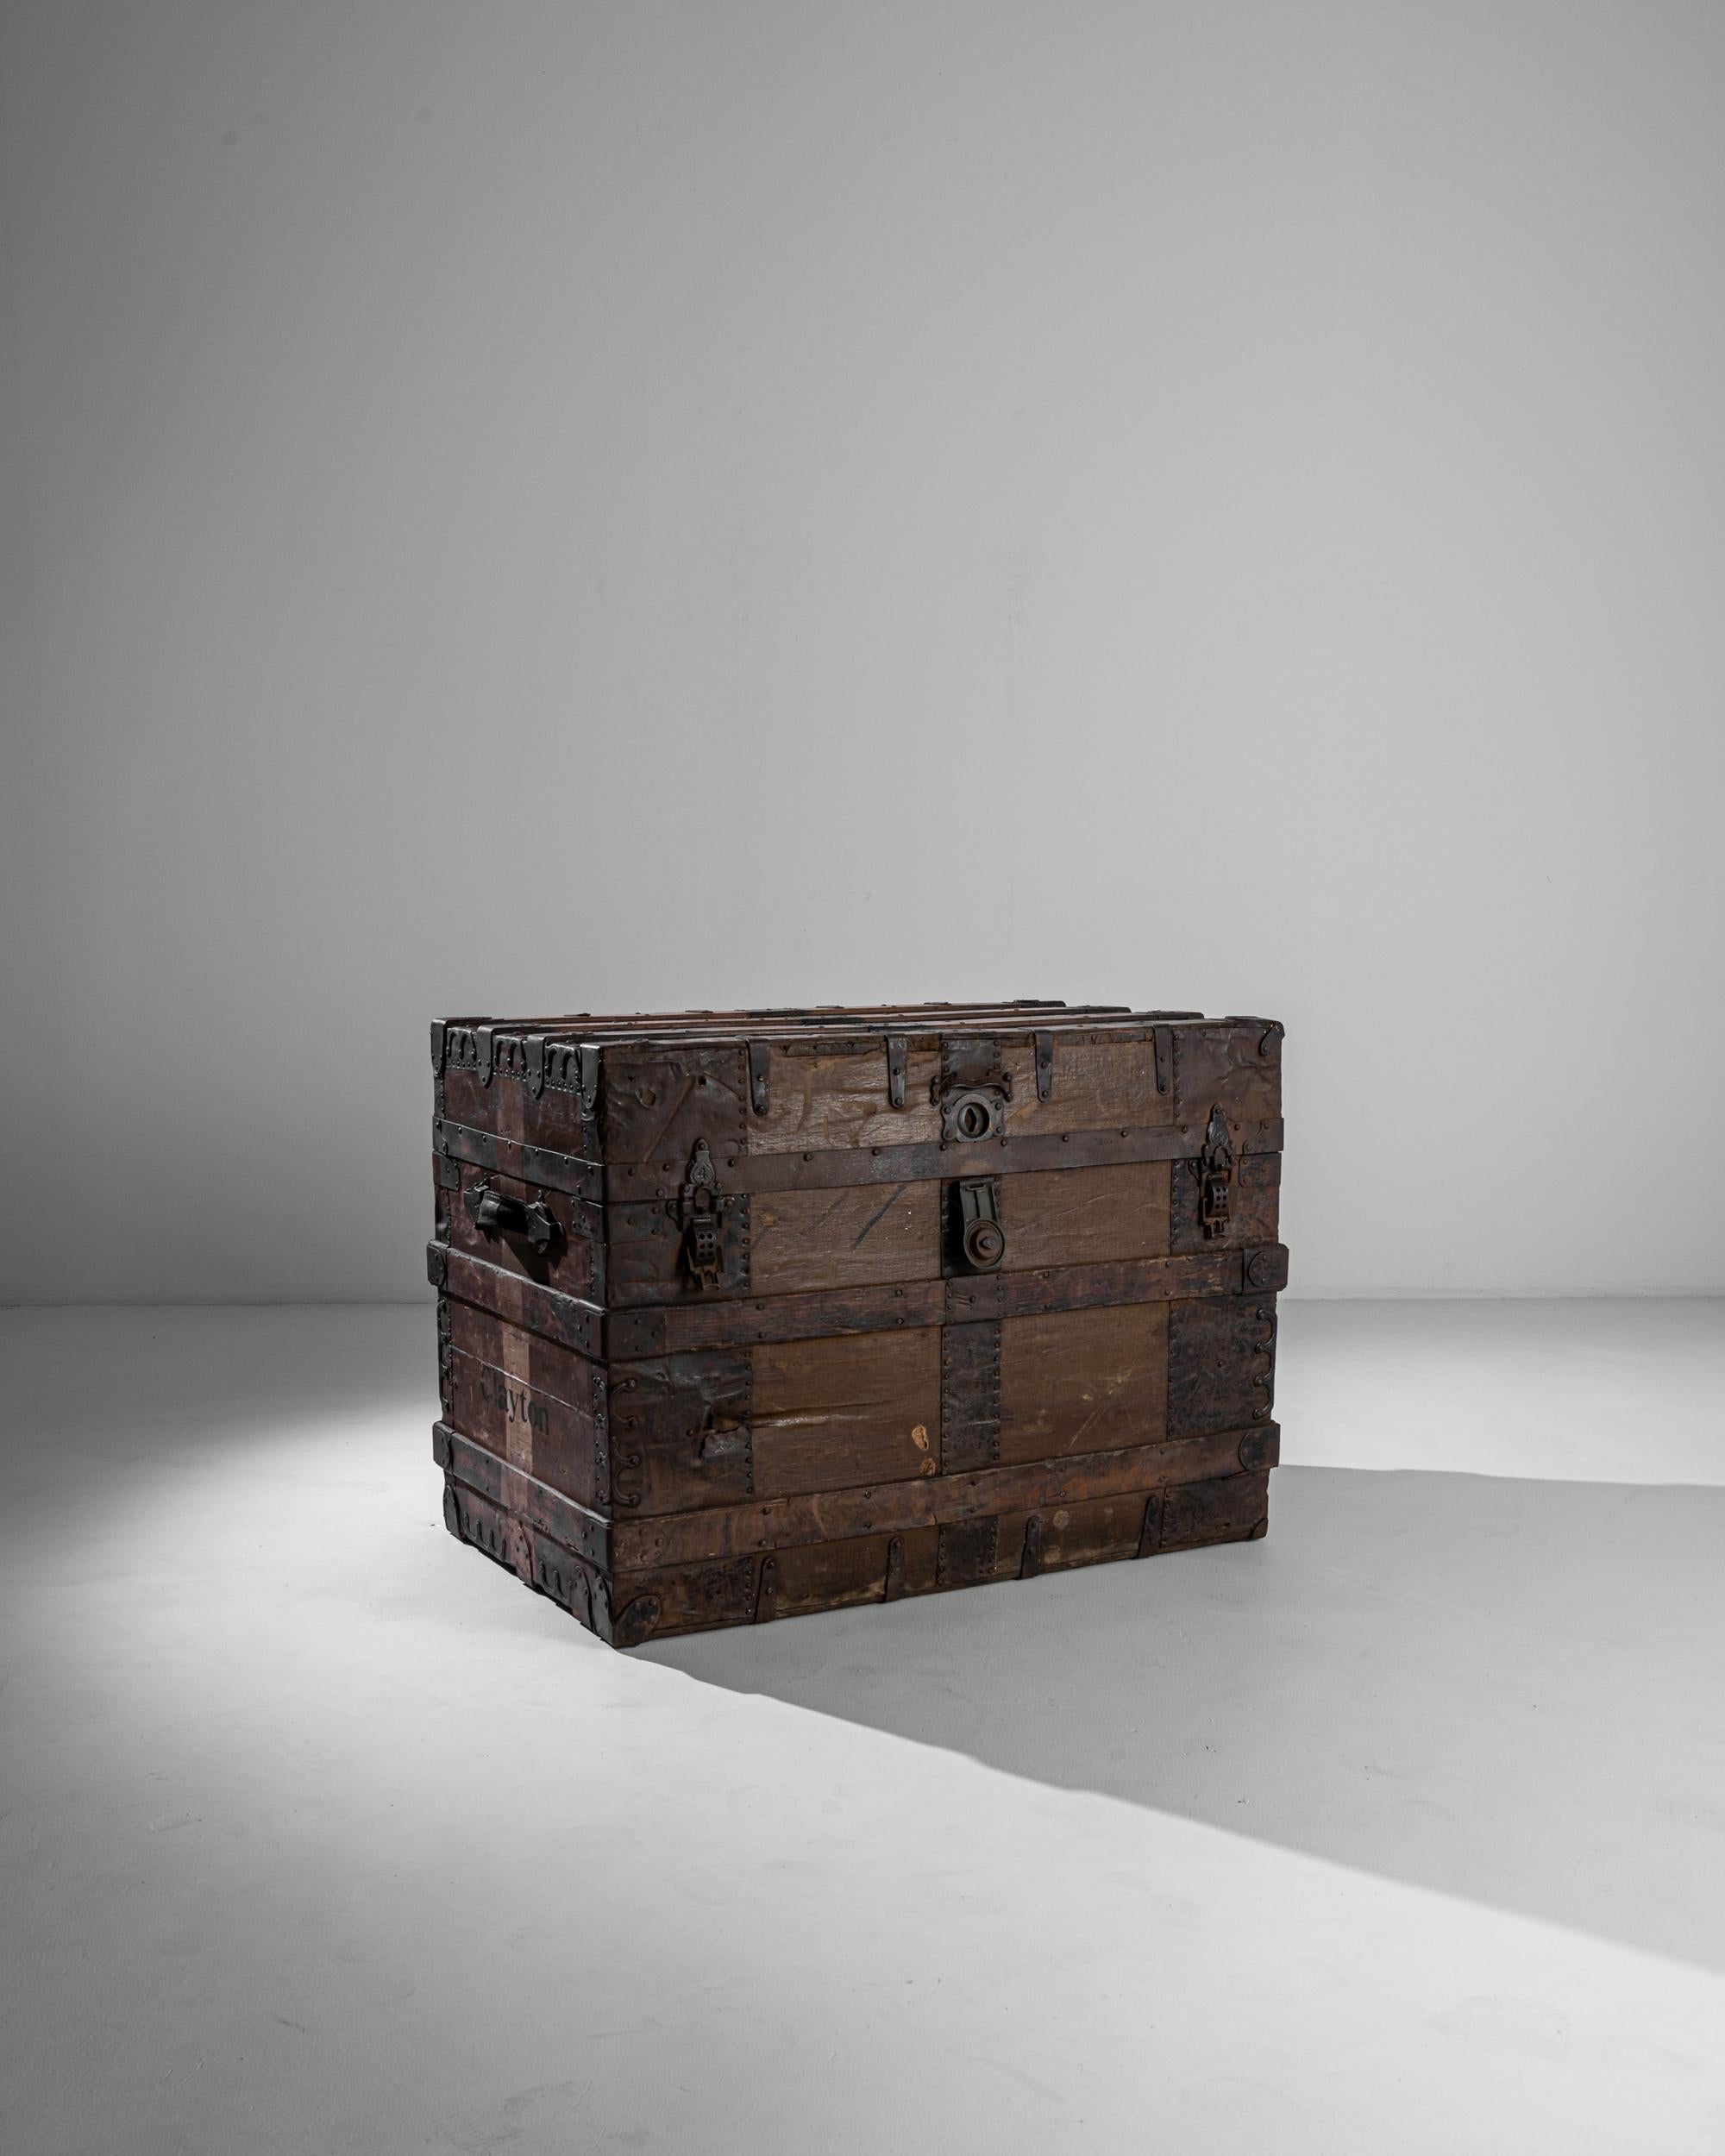 This sturdy wooden trunk was manufactured in the UK circa 1900. The chest is strengthened by sheets of iron, the sides and belted by wooden slats for extra durability. Ornamental iron elements —original drawbolts, hinges and the lock —add a slightly